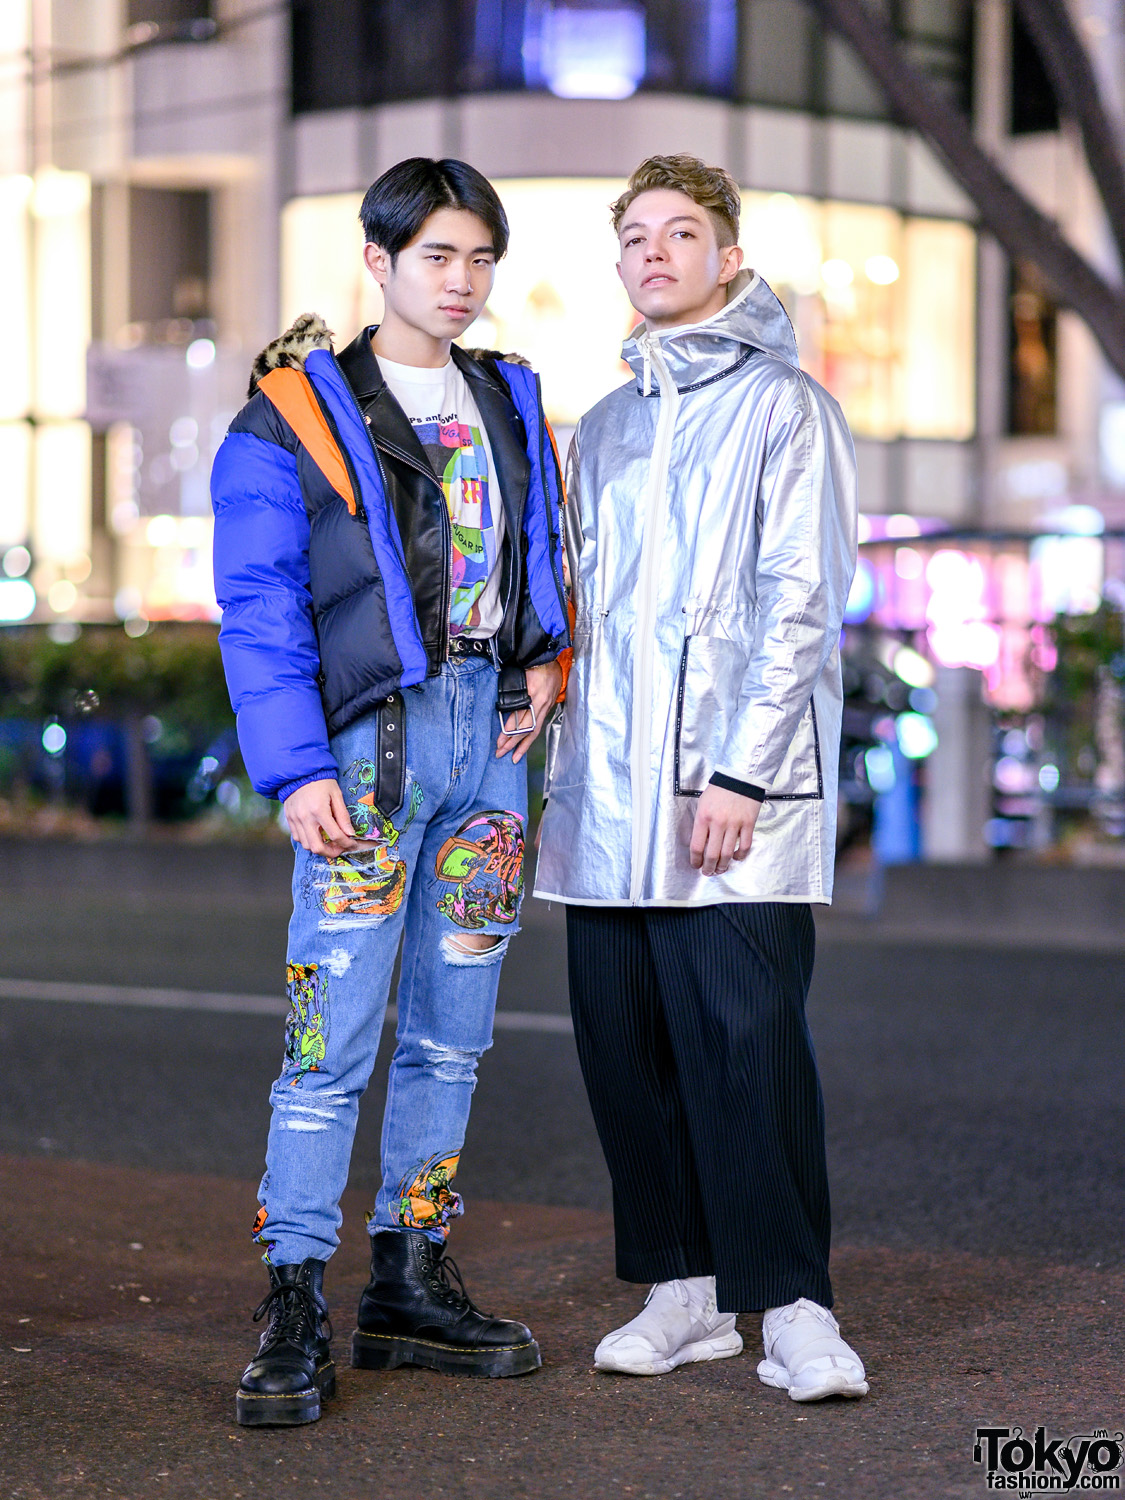 Tokyo Mens Streetwear Fashion w/ Moschino Puffer Jacket, Issey Miyake Accordion Pants, Jeremy Scott, Dr. Martens, RRR, Nike, Lemaire & Y-3 Sneakers